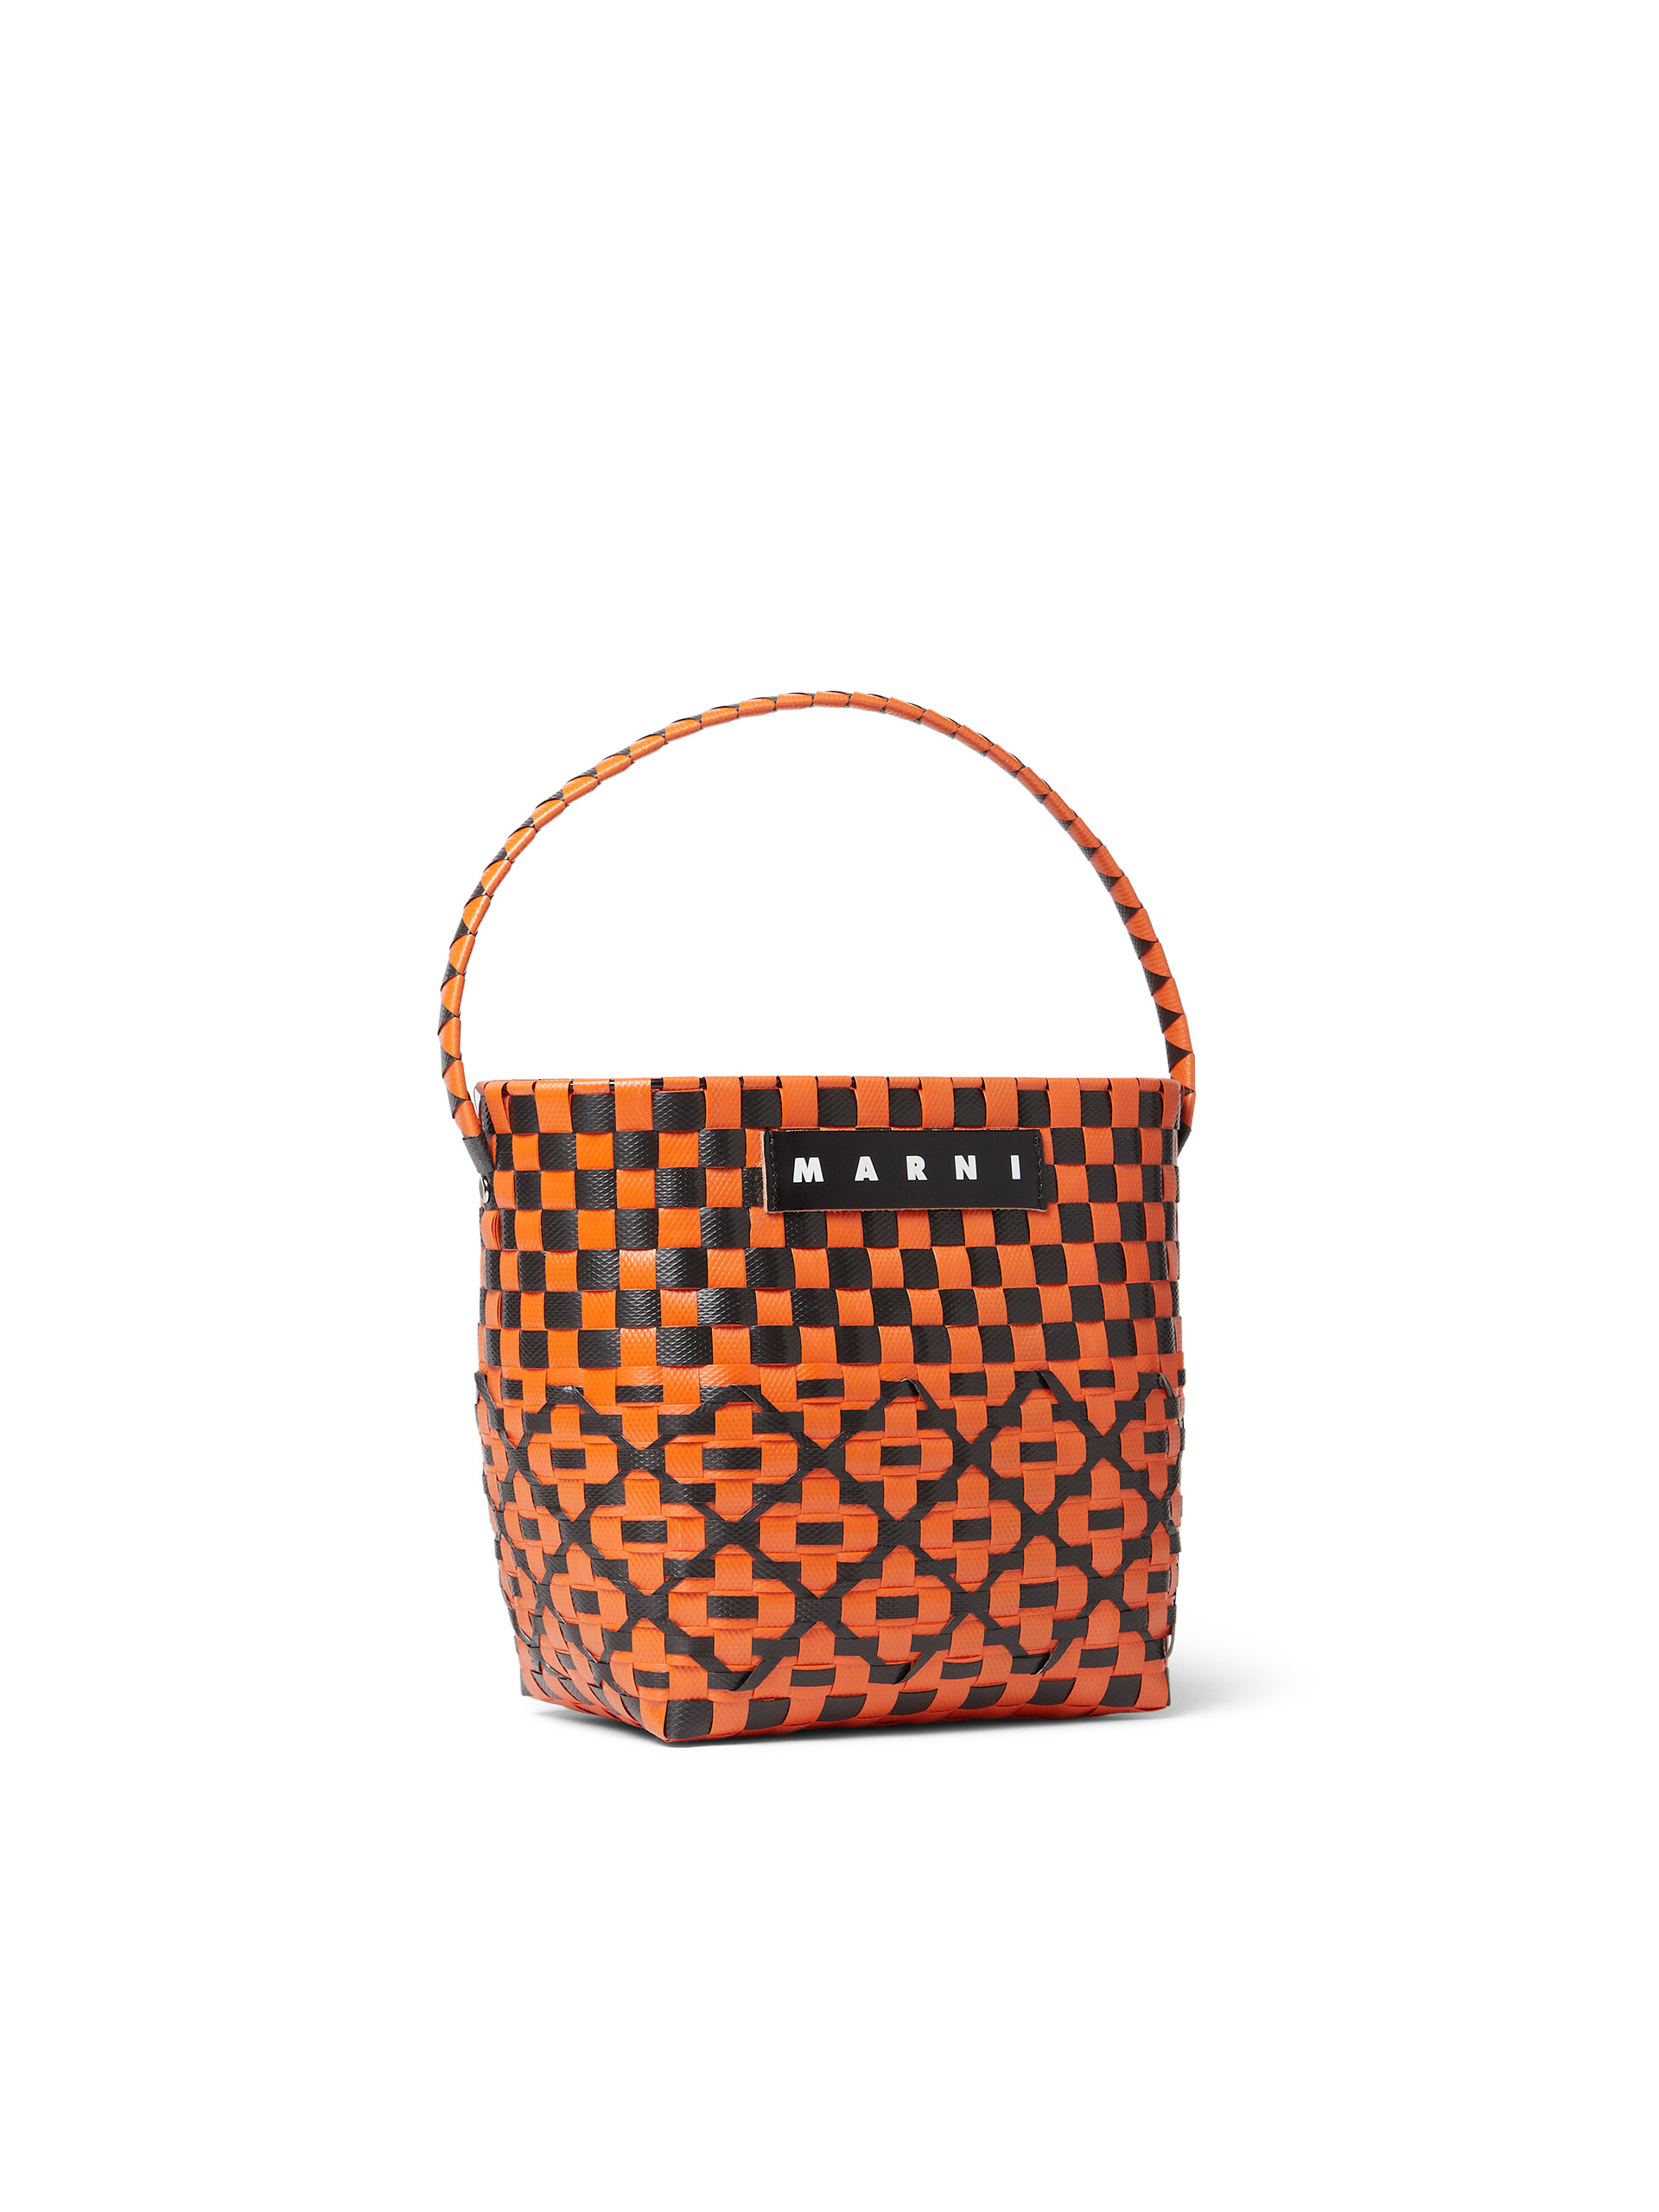 MARNI MARKET OVAL BASKET bag in orange and black woven material - Bags - Image 2